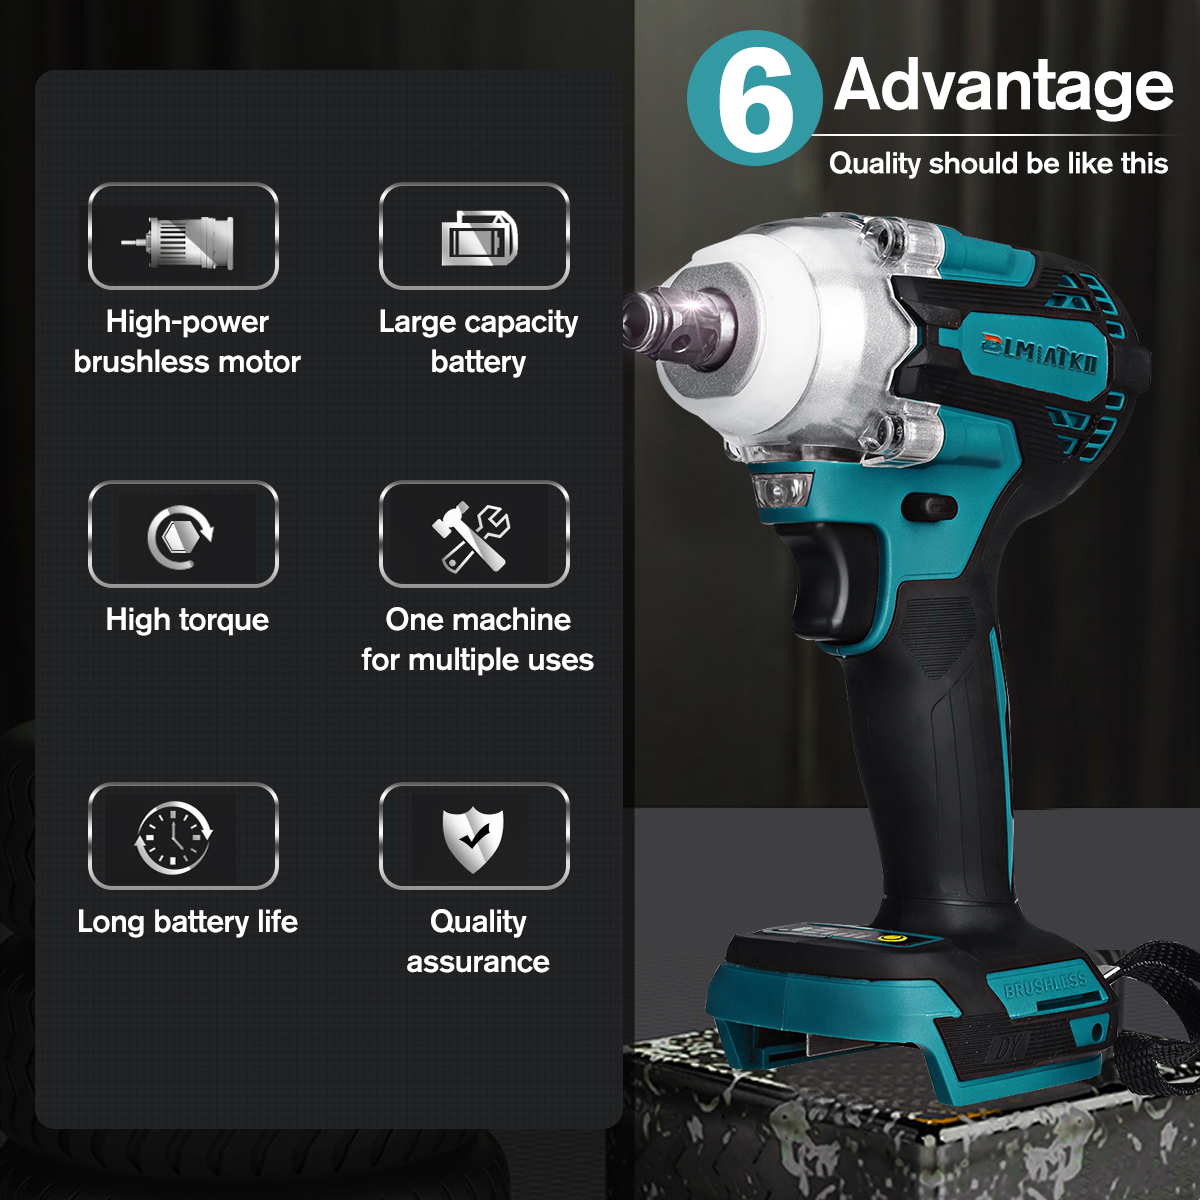 480Nm-Brushless-Impact-Wrench-Cordless-High-Torque-12-Socket-Electric-Wrench-Screwdriver-Power-Tool--1841579-3